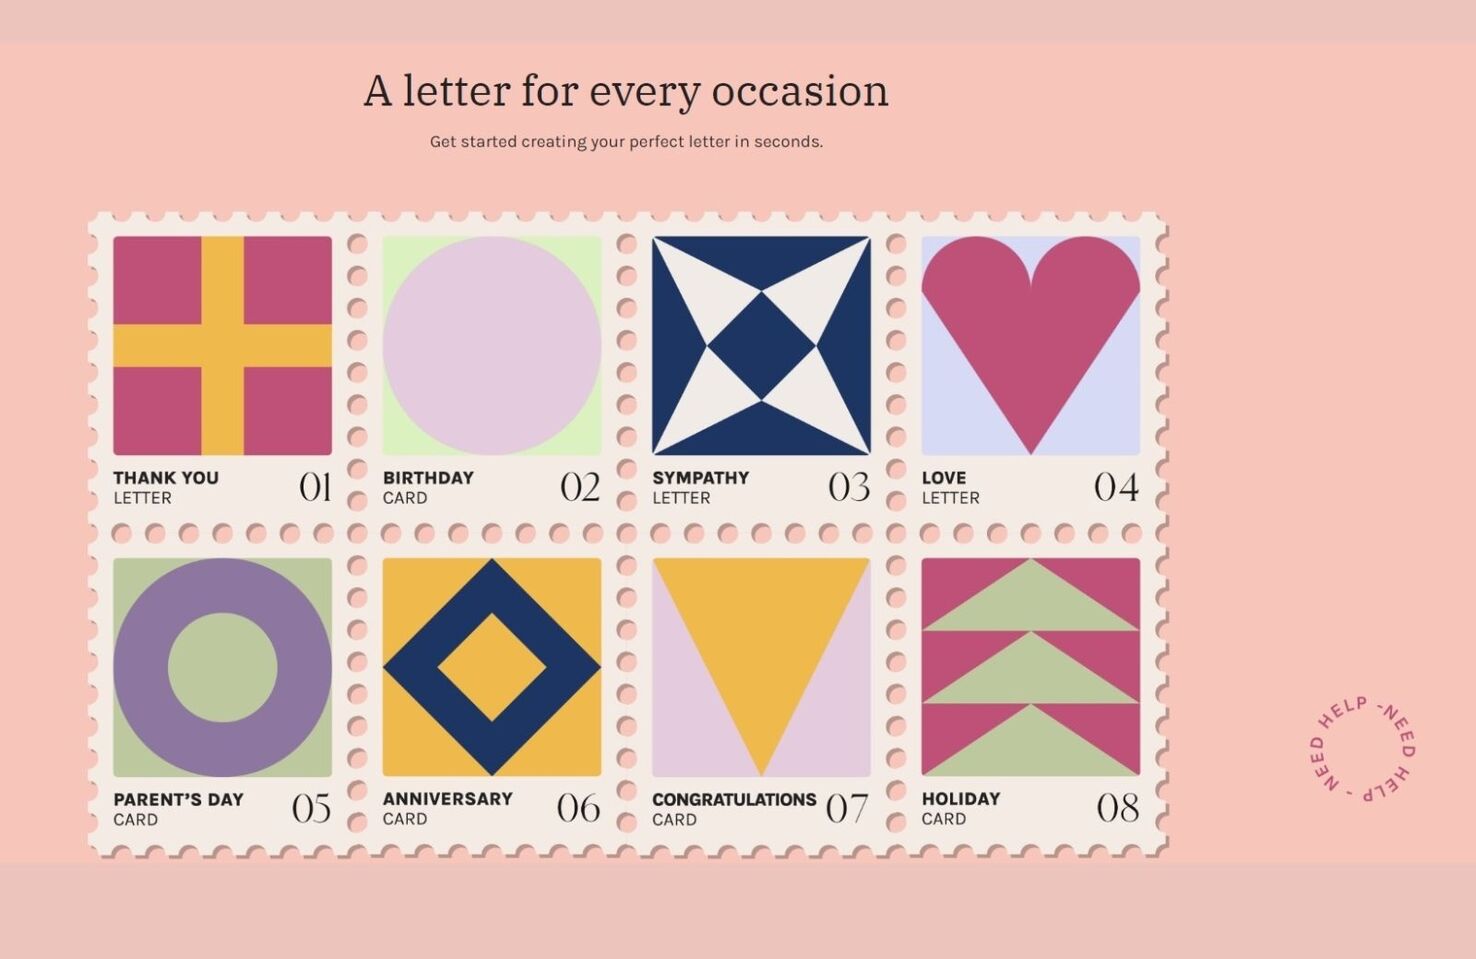 A letter for every occasion 0d0dcdb45e6eb89b4dbd7379b0730ab6